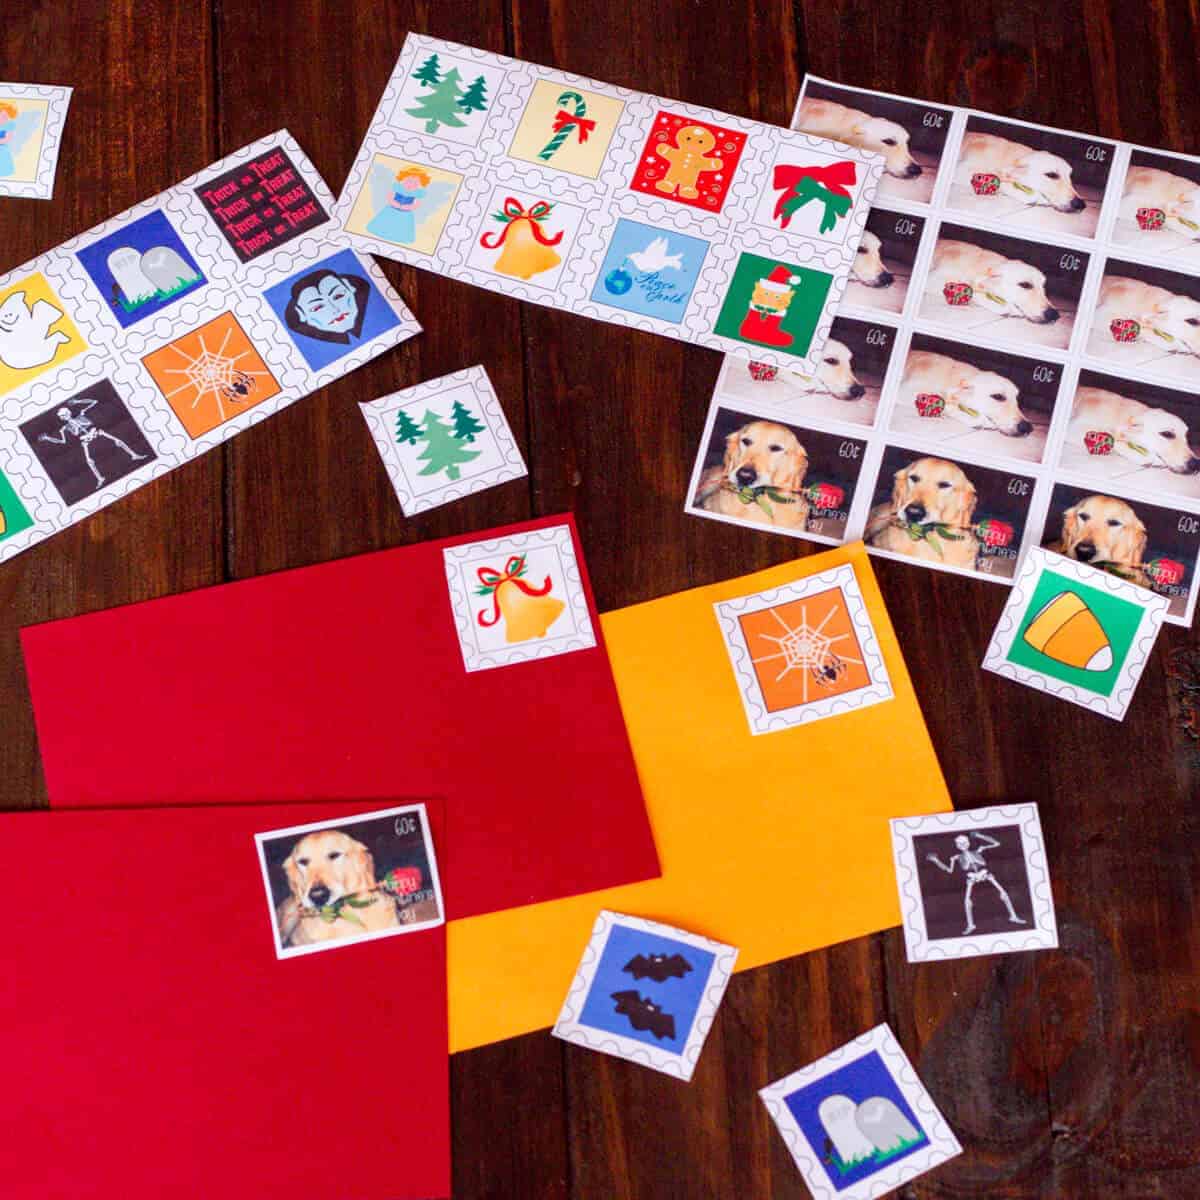 A variety of homemade holiday lick-and-stick stamps- some for Halloween, some for Valentine's Day, and some for Christmas. Some have been stuck to envelopes.